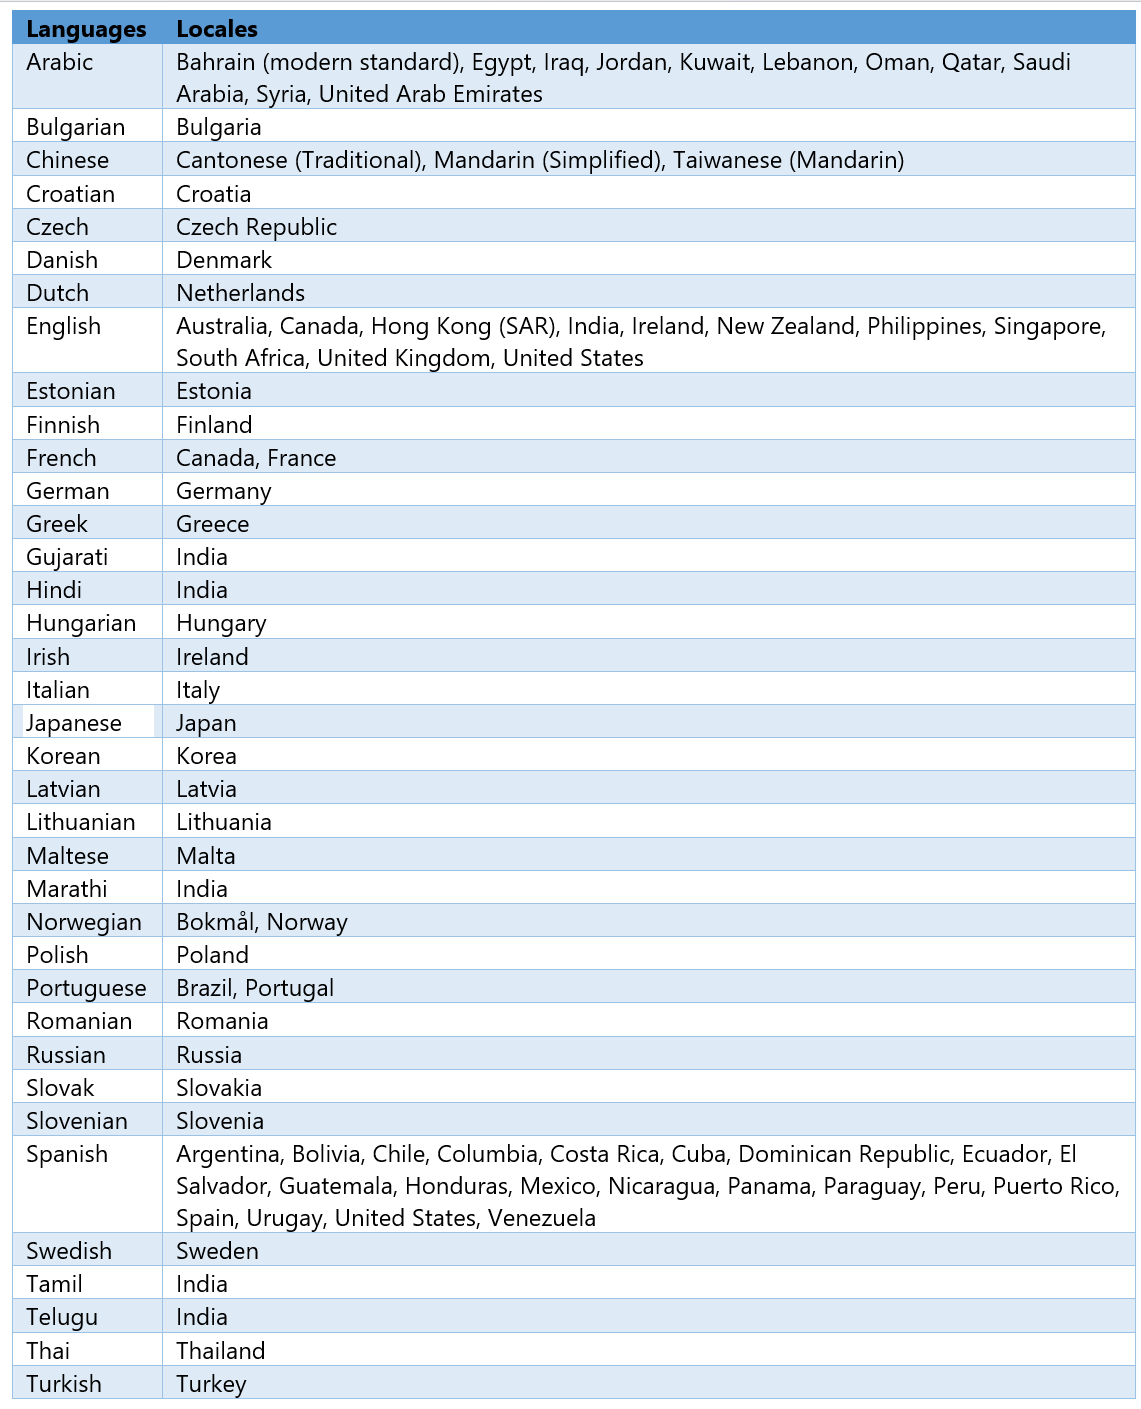 Table of supported languages and locales